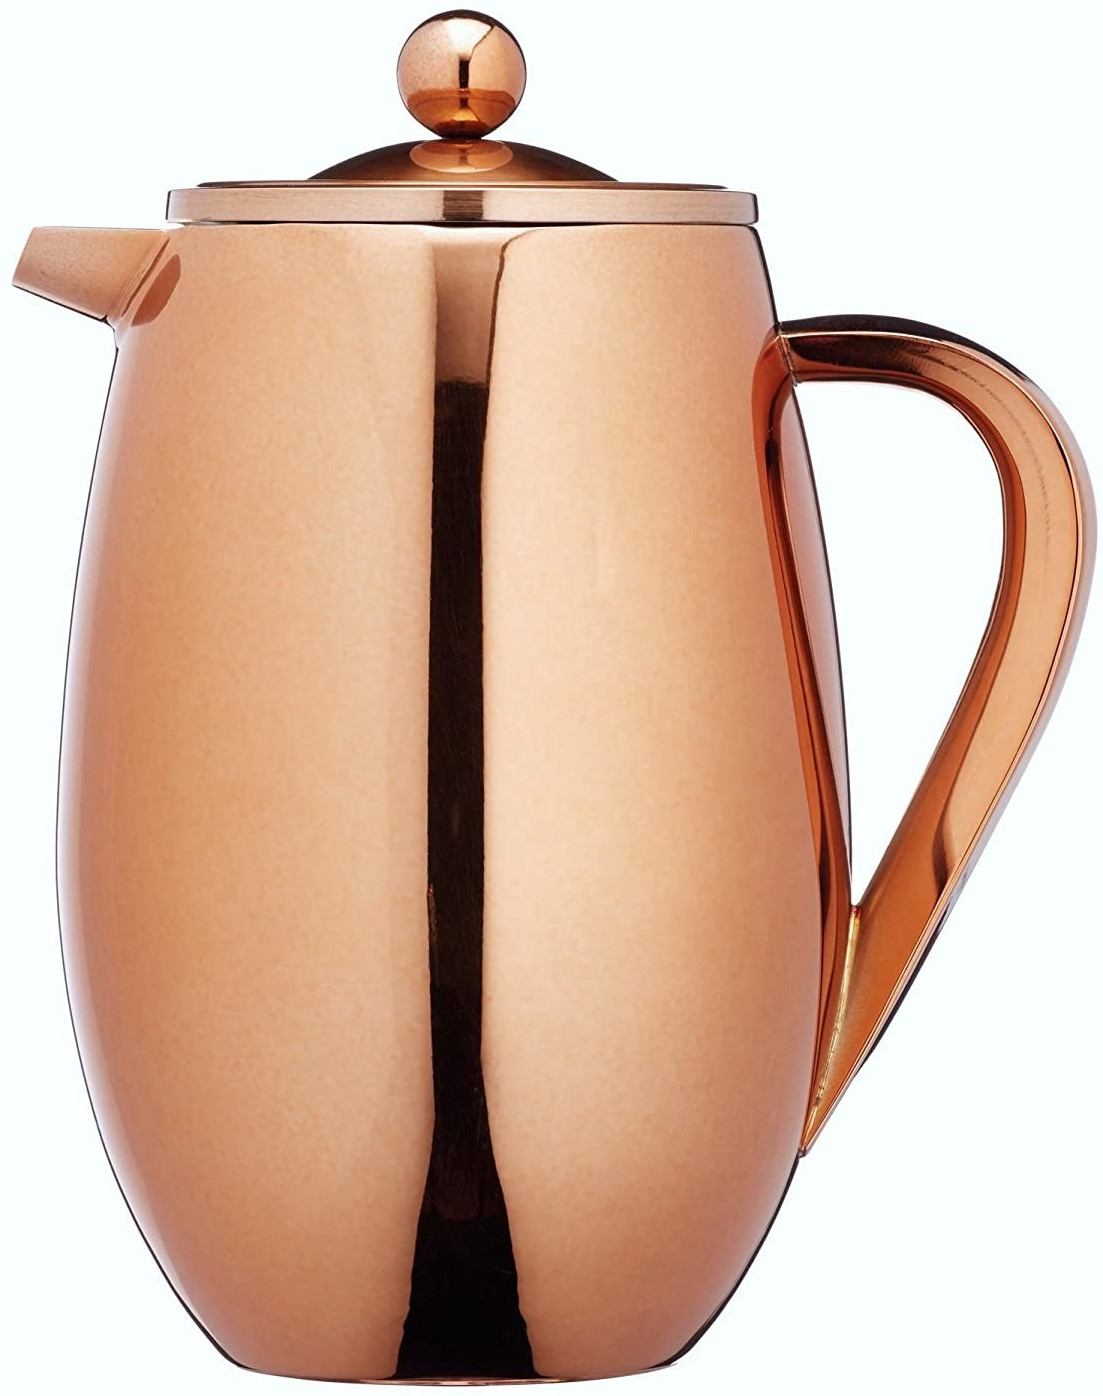 Photos - Coffee Maker Kitchen Craft Le'Xpress 8-Cup Insulated Cafetiere Copper 